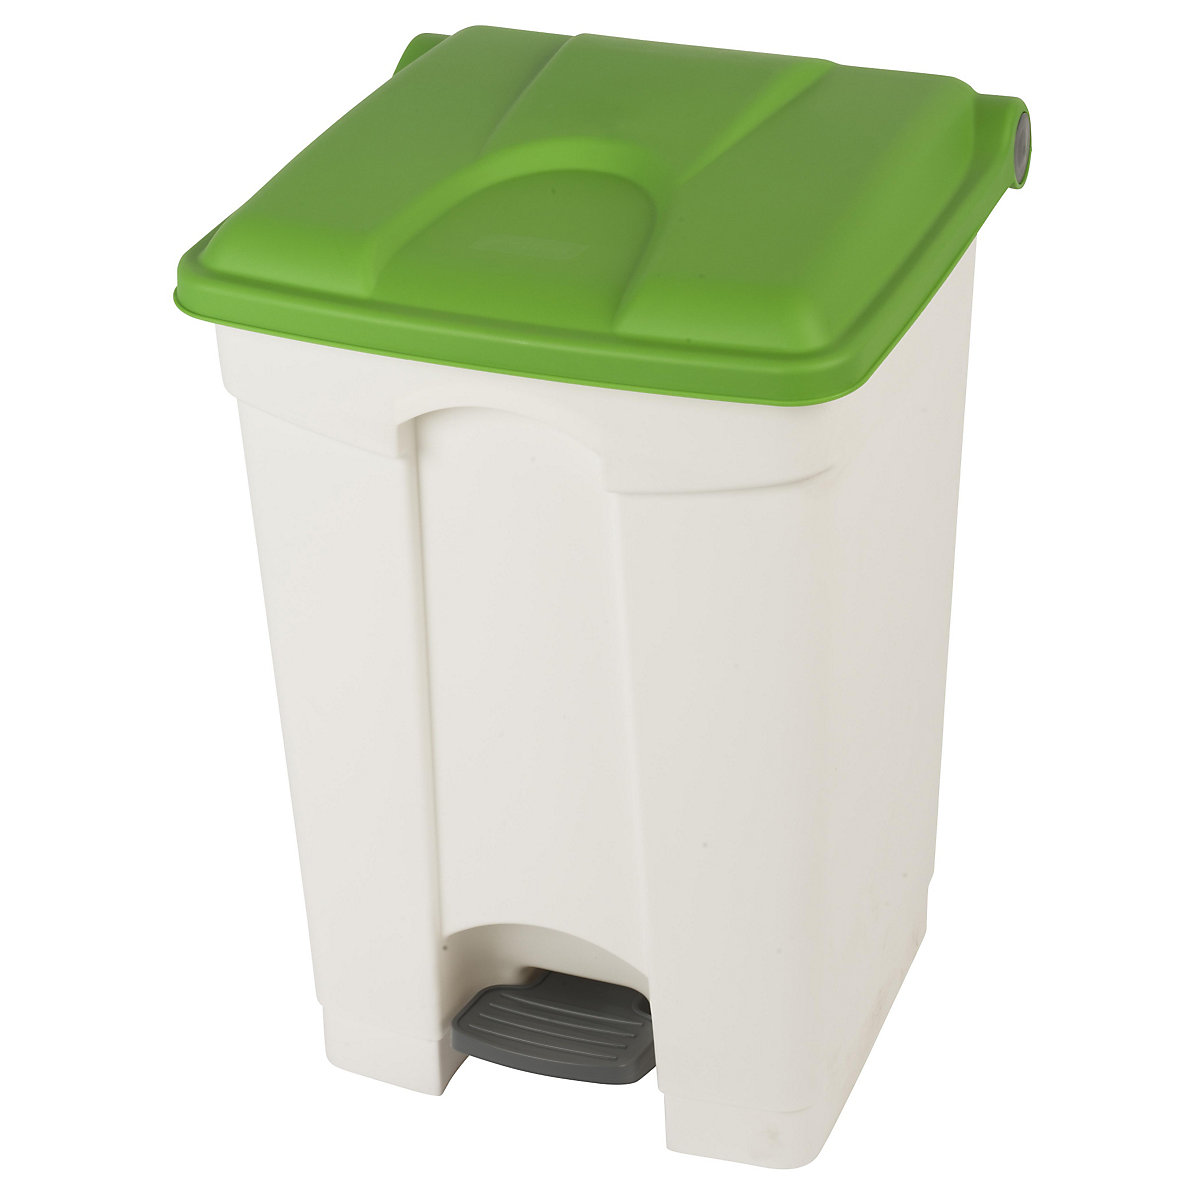 EUROKRAFTbasic – Pedal waste collector, capacity 45 l, WxHxD 410 x 600 x 400 mm, white, green lid